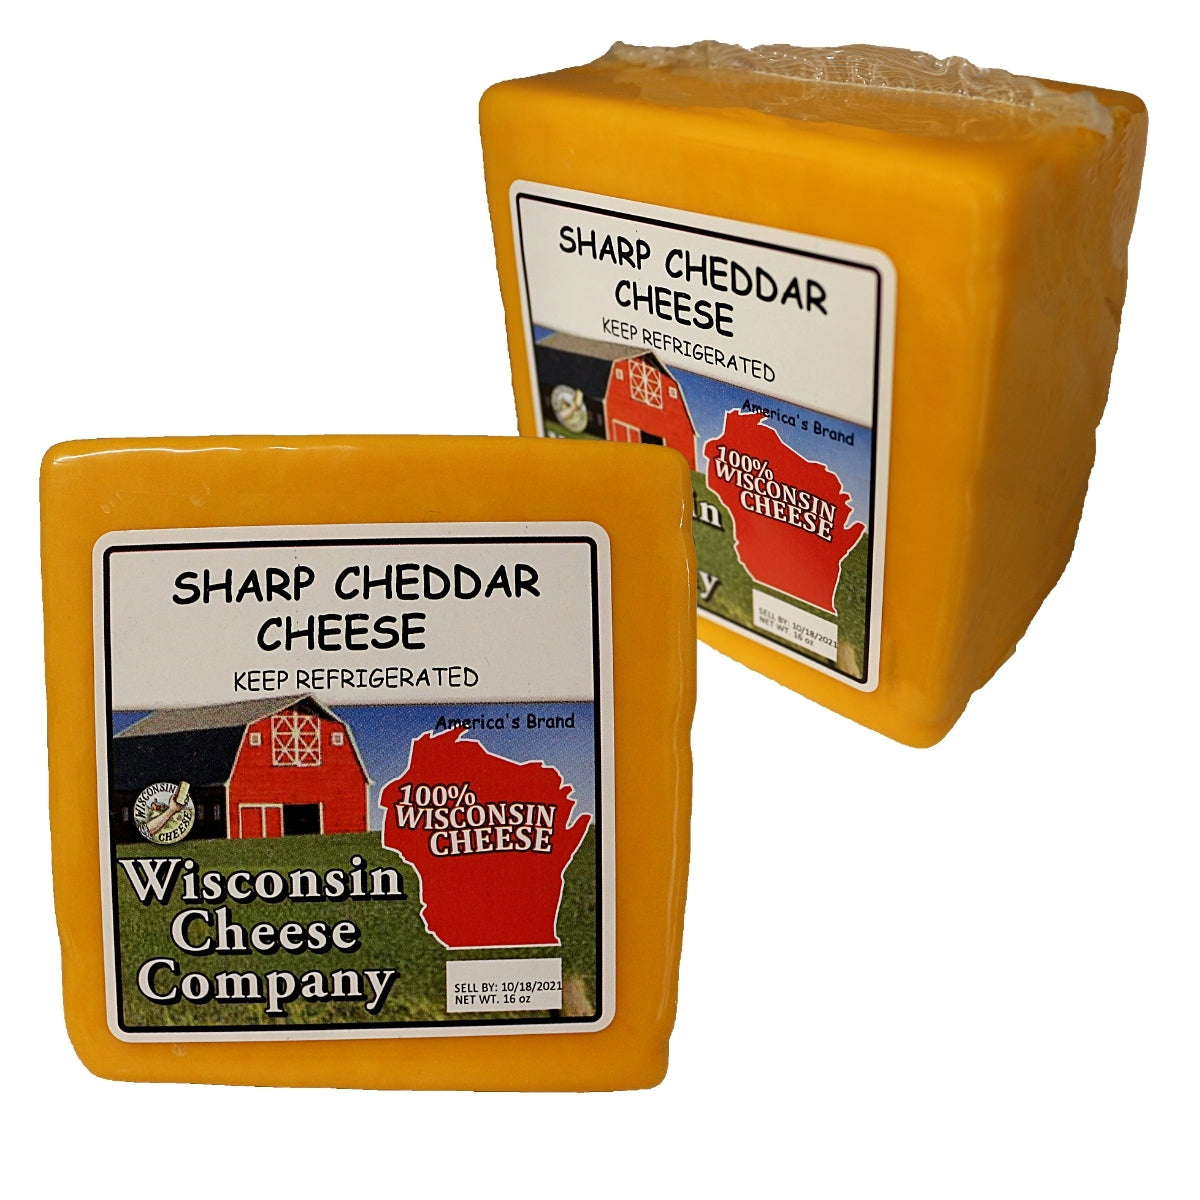 Two blocks of Sharp Cheddar Cheese